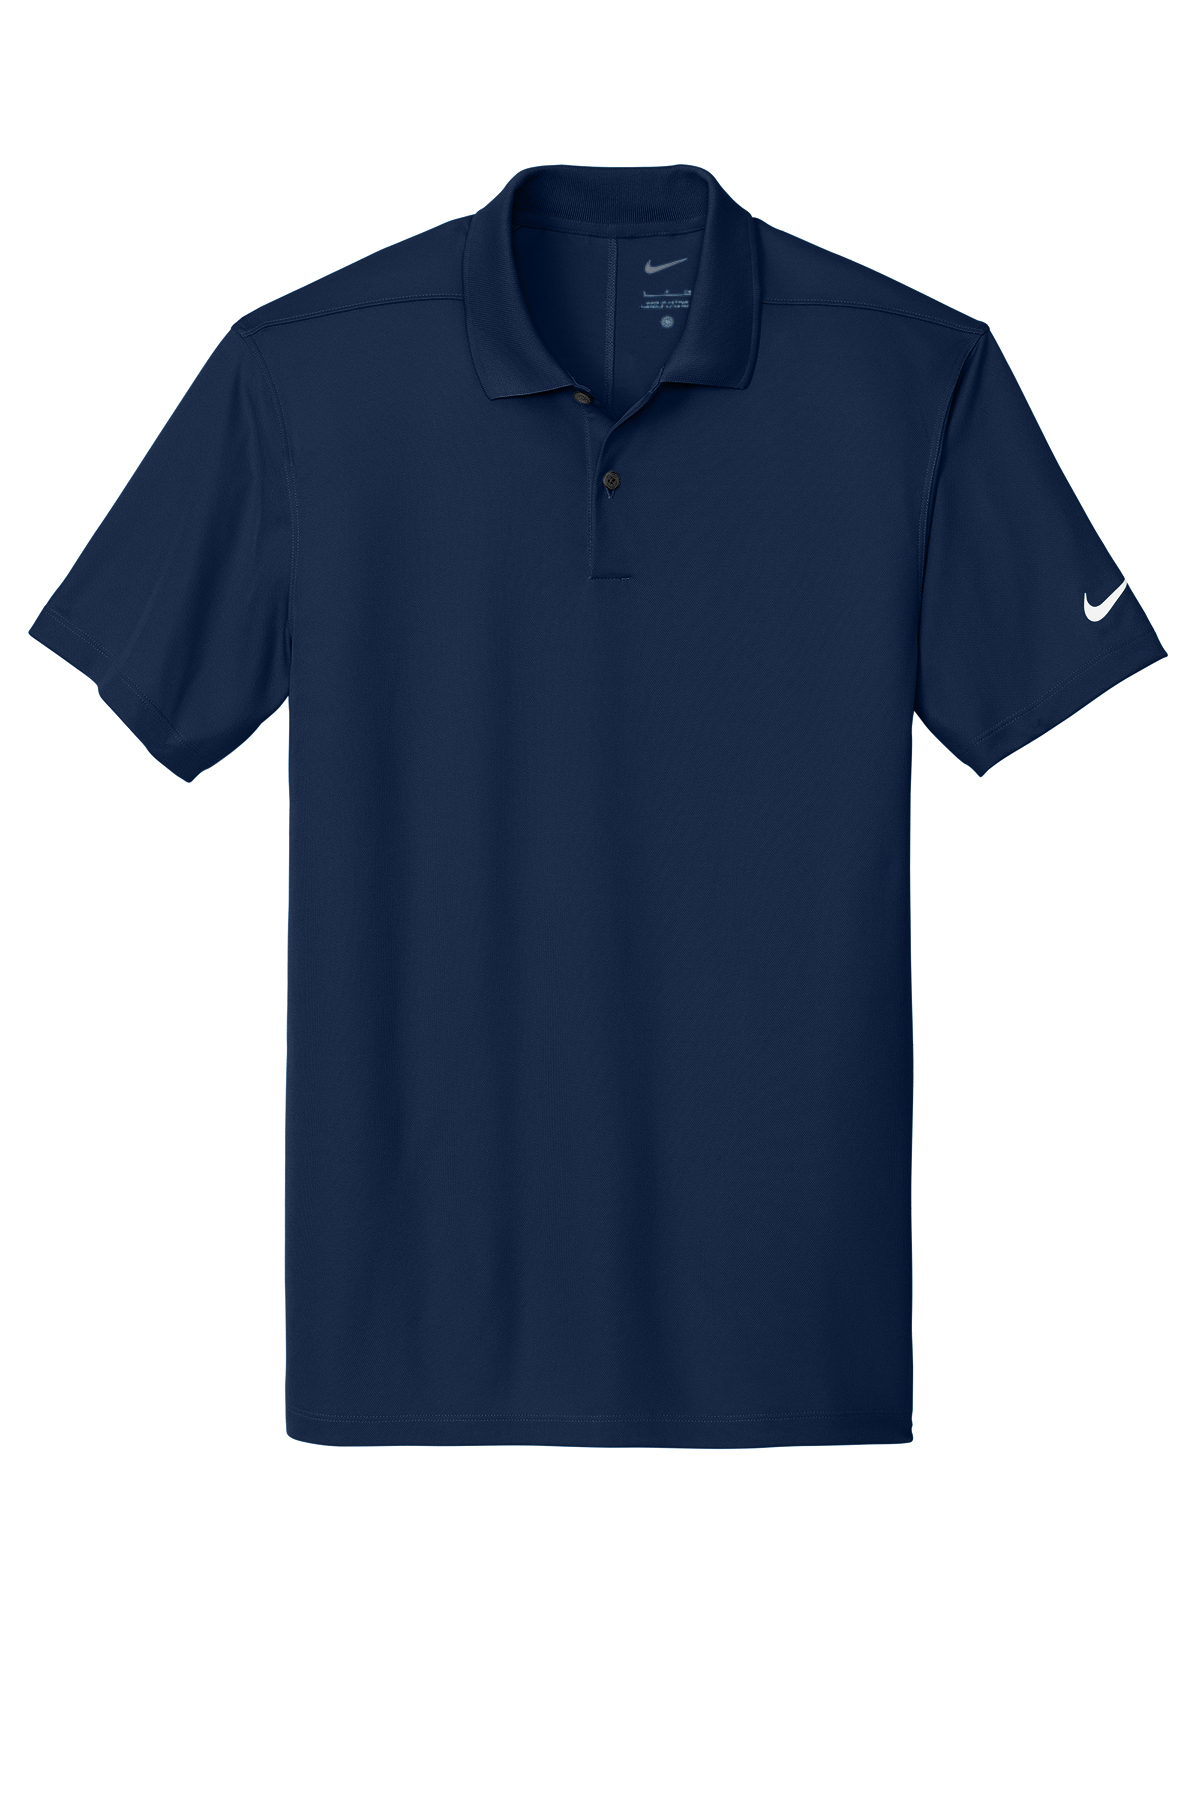 Nike Victory Solid Polo | Product | SanMar